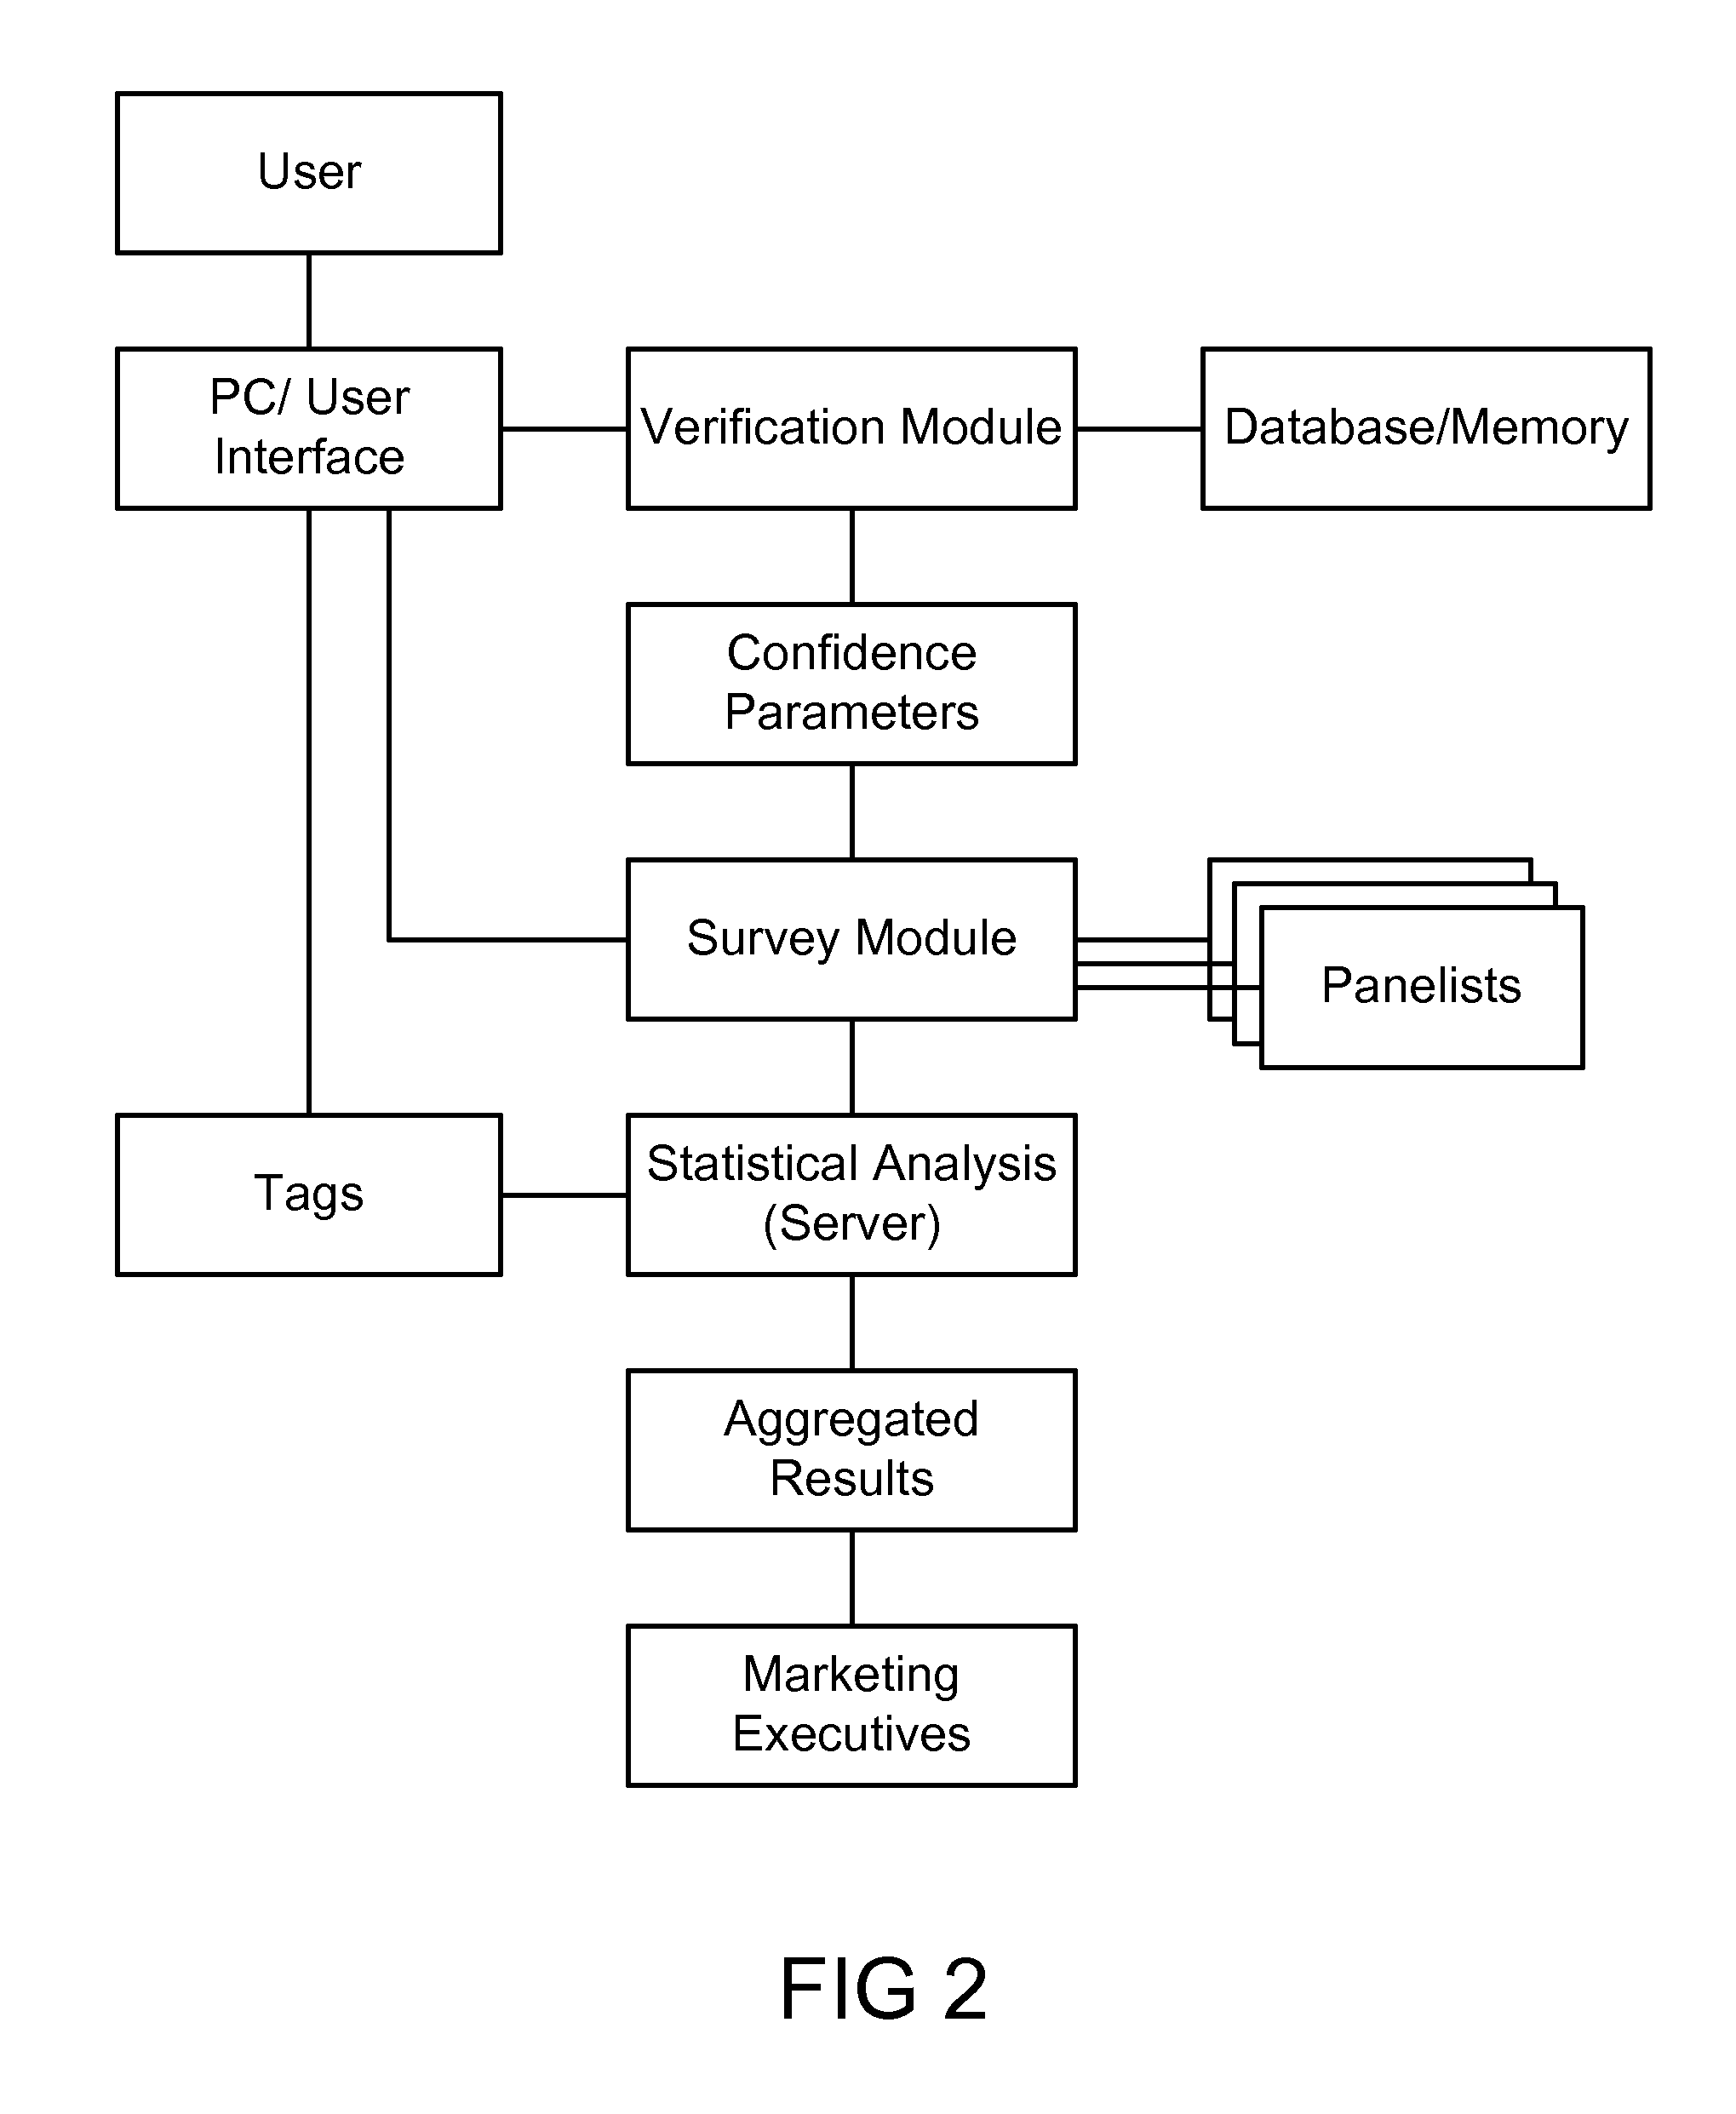 Method and System for Improving the Truthfulness, Reliability, and Segmentation of Opinion Research Panels